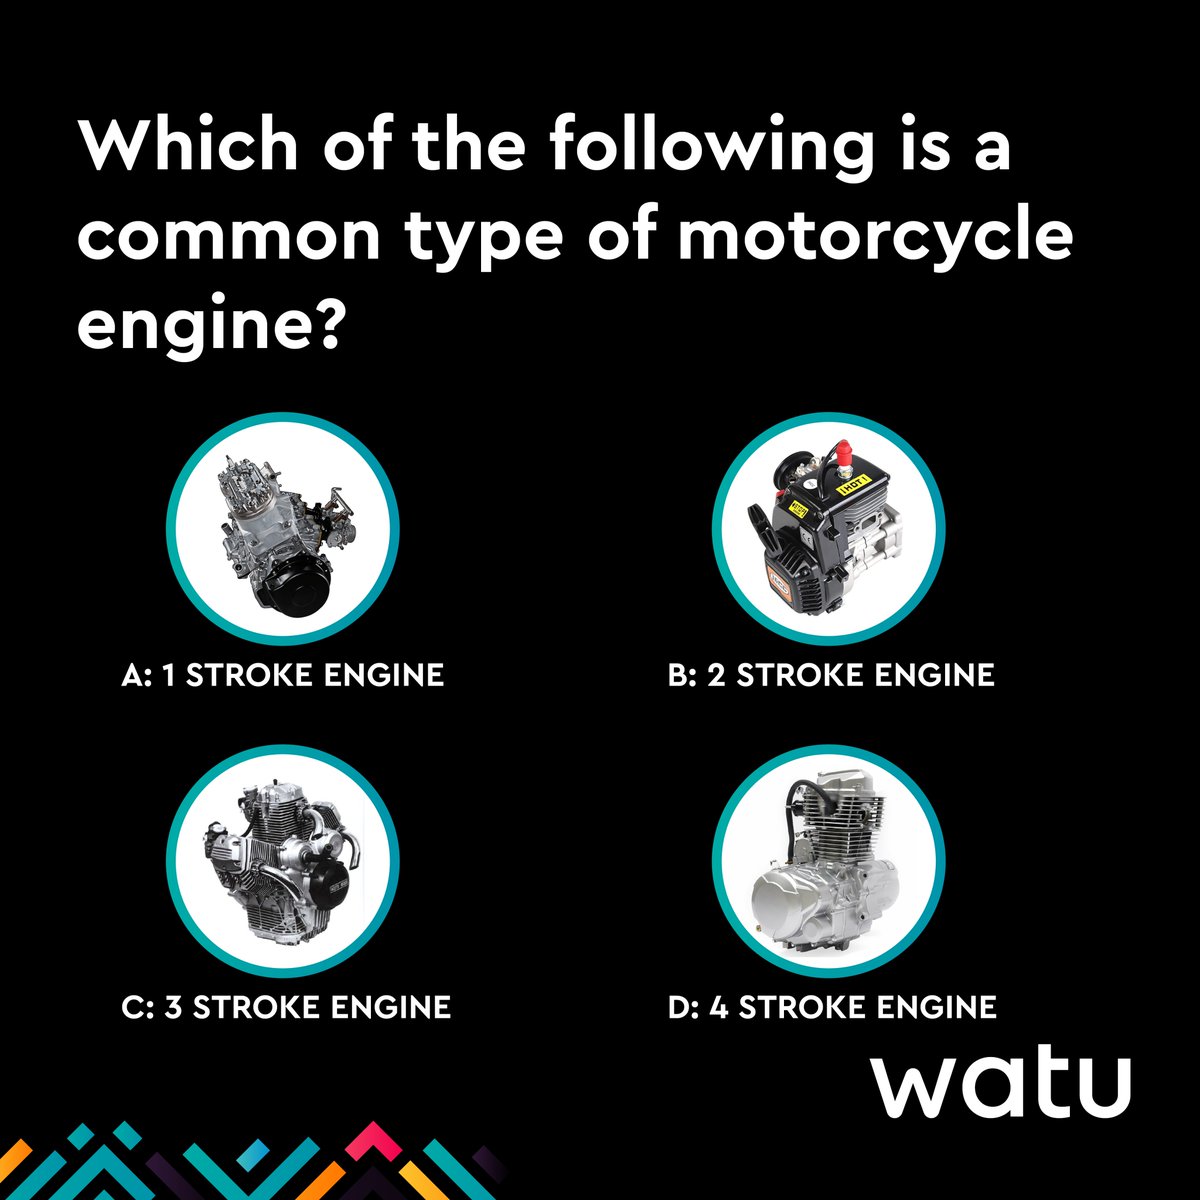 Think you know everything about your bike? Take this quiz and find out!

Give us your answers in the replies. ⬇️

#Africa #WatuForWatu #TGIF #Quiz #Bike #WatuAfrica